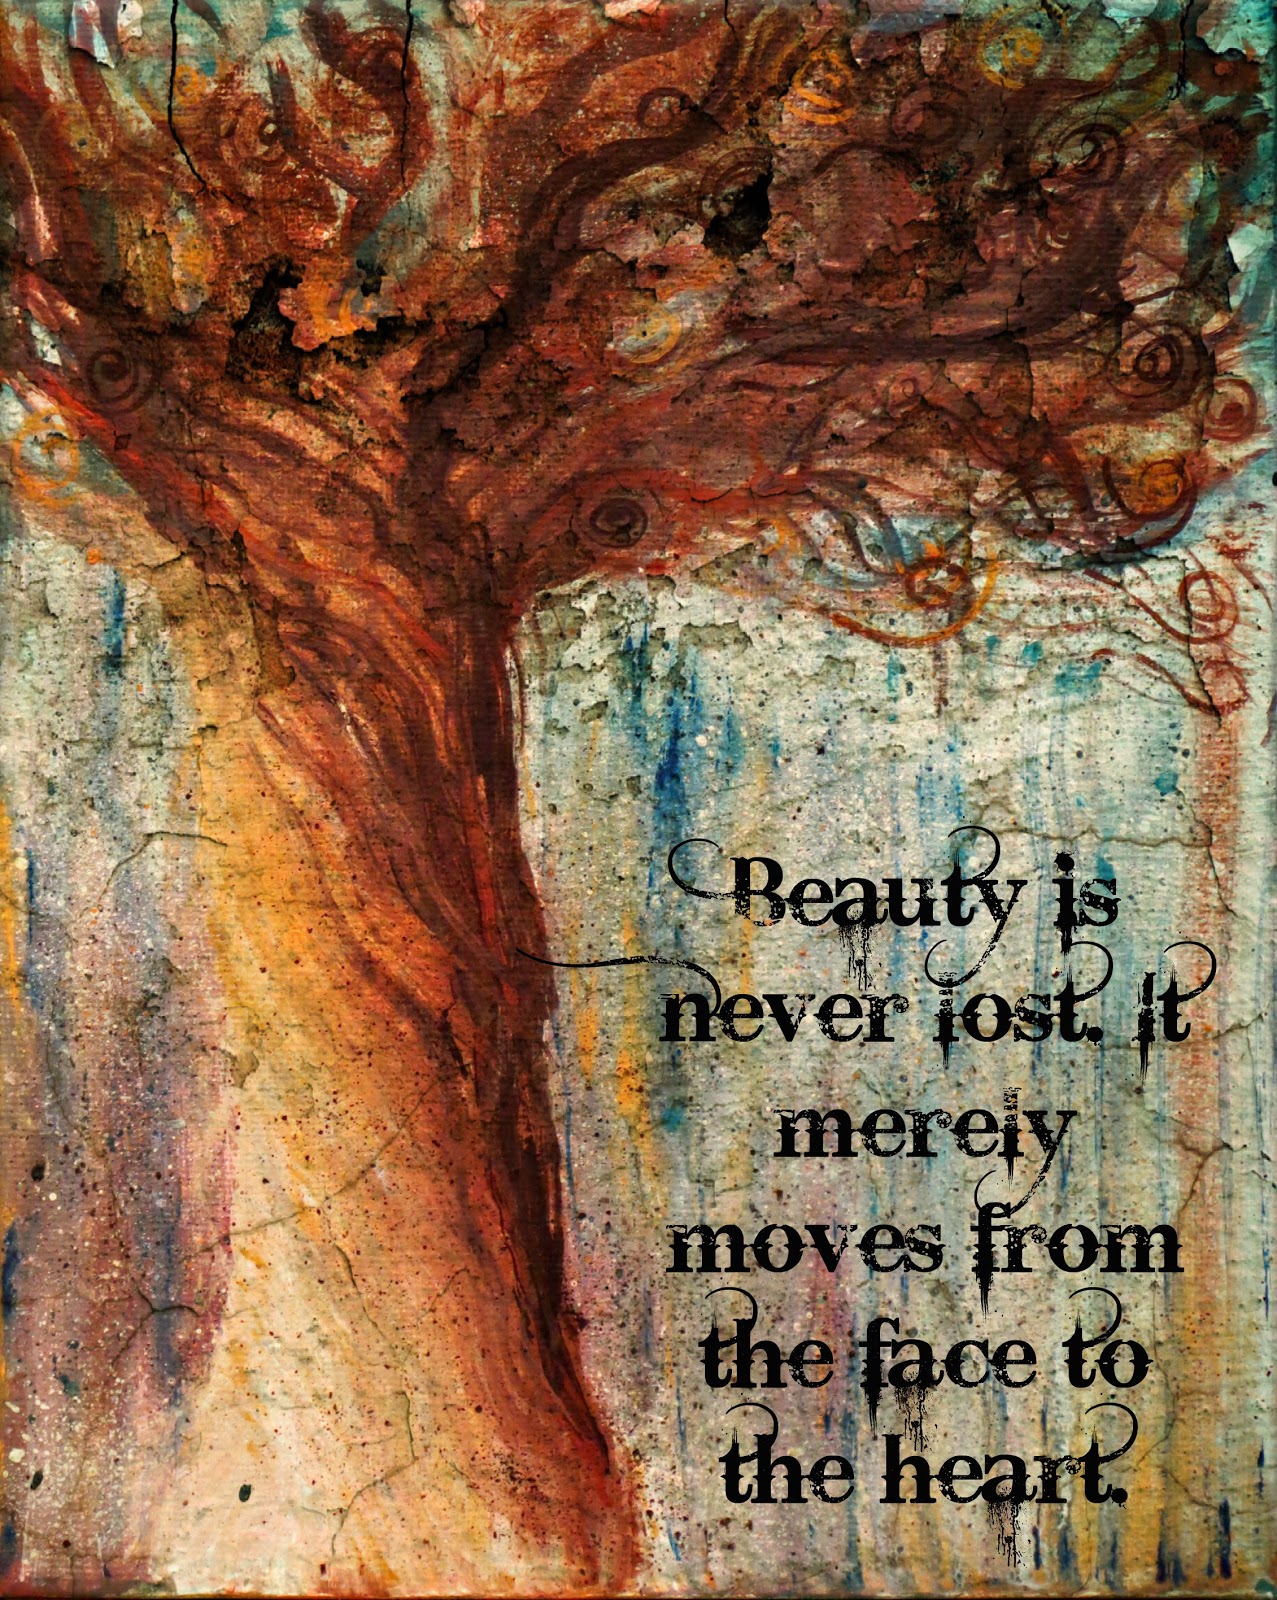 Beauty is never lost. It merely moves from the face to the heart